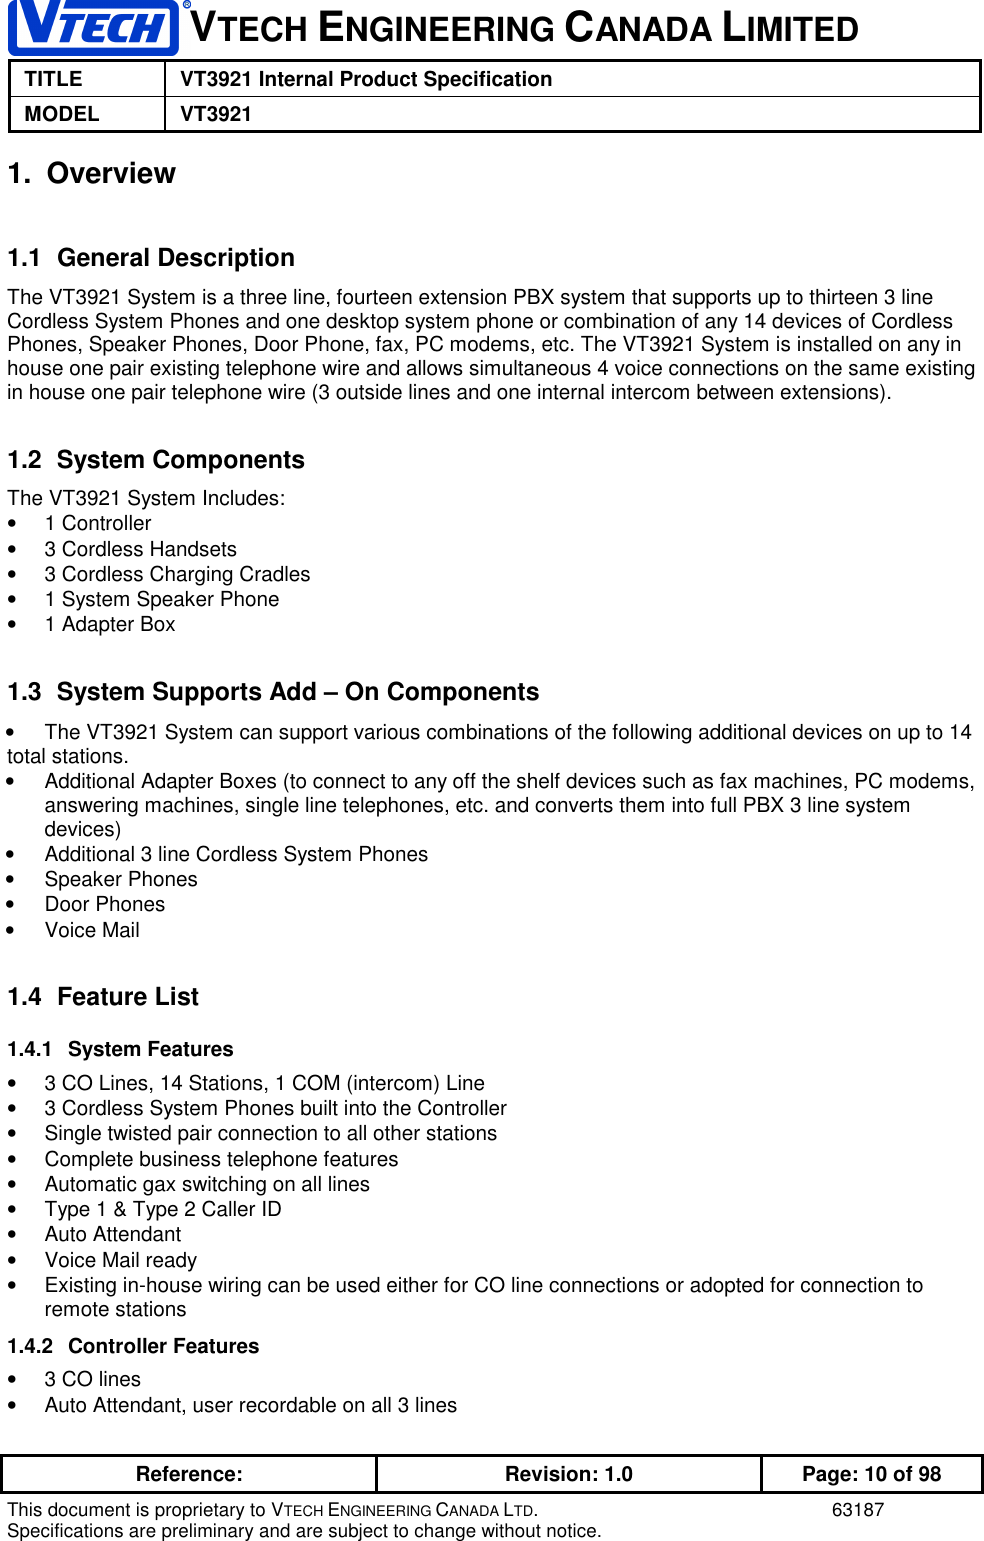 1VTECH ENGINEERING CANADA LIMITEDTITLE VT3921 Internal Product SpecificationMODEL VT3921Reference: Revision: 1.0 Page: 10 of 98This document is proprietary to VTECH ENGINEERING CANADA LTD. 63187Specifications are preliminary and are subject to change without notice.1. Overview1.1 General DescriptionThe VT3921 System is a three line, fourteen extension PBX system that supports up to thirteen 3 lineCordless System Phones and one desktop system phone or combination of any 14 devices of CordlessPhones, Speaker Phones, Door Phone, fax, PC modems, etc. The VT3921 System is installed on any inhouse one pair existing telephone wire and allows simultaneous 4 voice connections on the same existingin house one pair telephone wire (3 outside lines and one internal intercom between extensions).1.2 System ComponentsThe VT3921 System Includes:• 1 Controller•  3 Cordless Handsets•  3 Cordless Charging Cradles•  1 System Speaker Phone•  1 Adapter Box1.3  System Supports Add – On Components•  The VT3921 System can support various combinations of the following additional devices on up to 14total stations.•  Additional Adapter Boxes (to connect to any off the shelf devices such as fax machines, PC modems,answering machines, single line telephones, etc. and converts them into full PBX 3 line systemdevices)•  Additional 3 line Cordless System Phones• Speaker Phones• Door Phones• Voice Mail1.4 Feature List1.4.1 System Features•  3 CO Lines, 14 Stations, 1 COM (intercom) Line•  3 Cordless System Phones built into the Controller•  Single twisted pair connection to all other stations•  Complete business telephone features•  Automatic gax switching on all lines•  Type 1 &amp; Type 2 Caller ID• Auto Attendant•  Voice Mail ready•  Existing in-house wiring can be used either for CO line connections or adopted for connection toremote stations1.4.2 Controller Features•  3 CO lines•  Auto Attendant, user recordable on all 3 lines